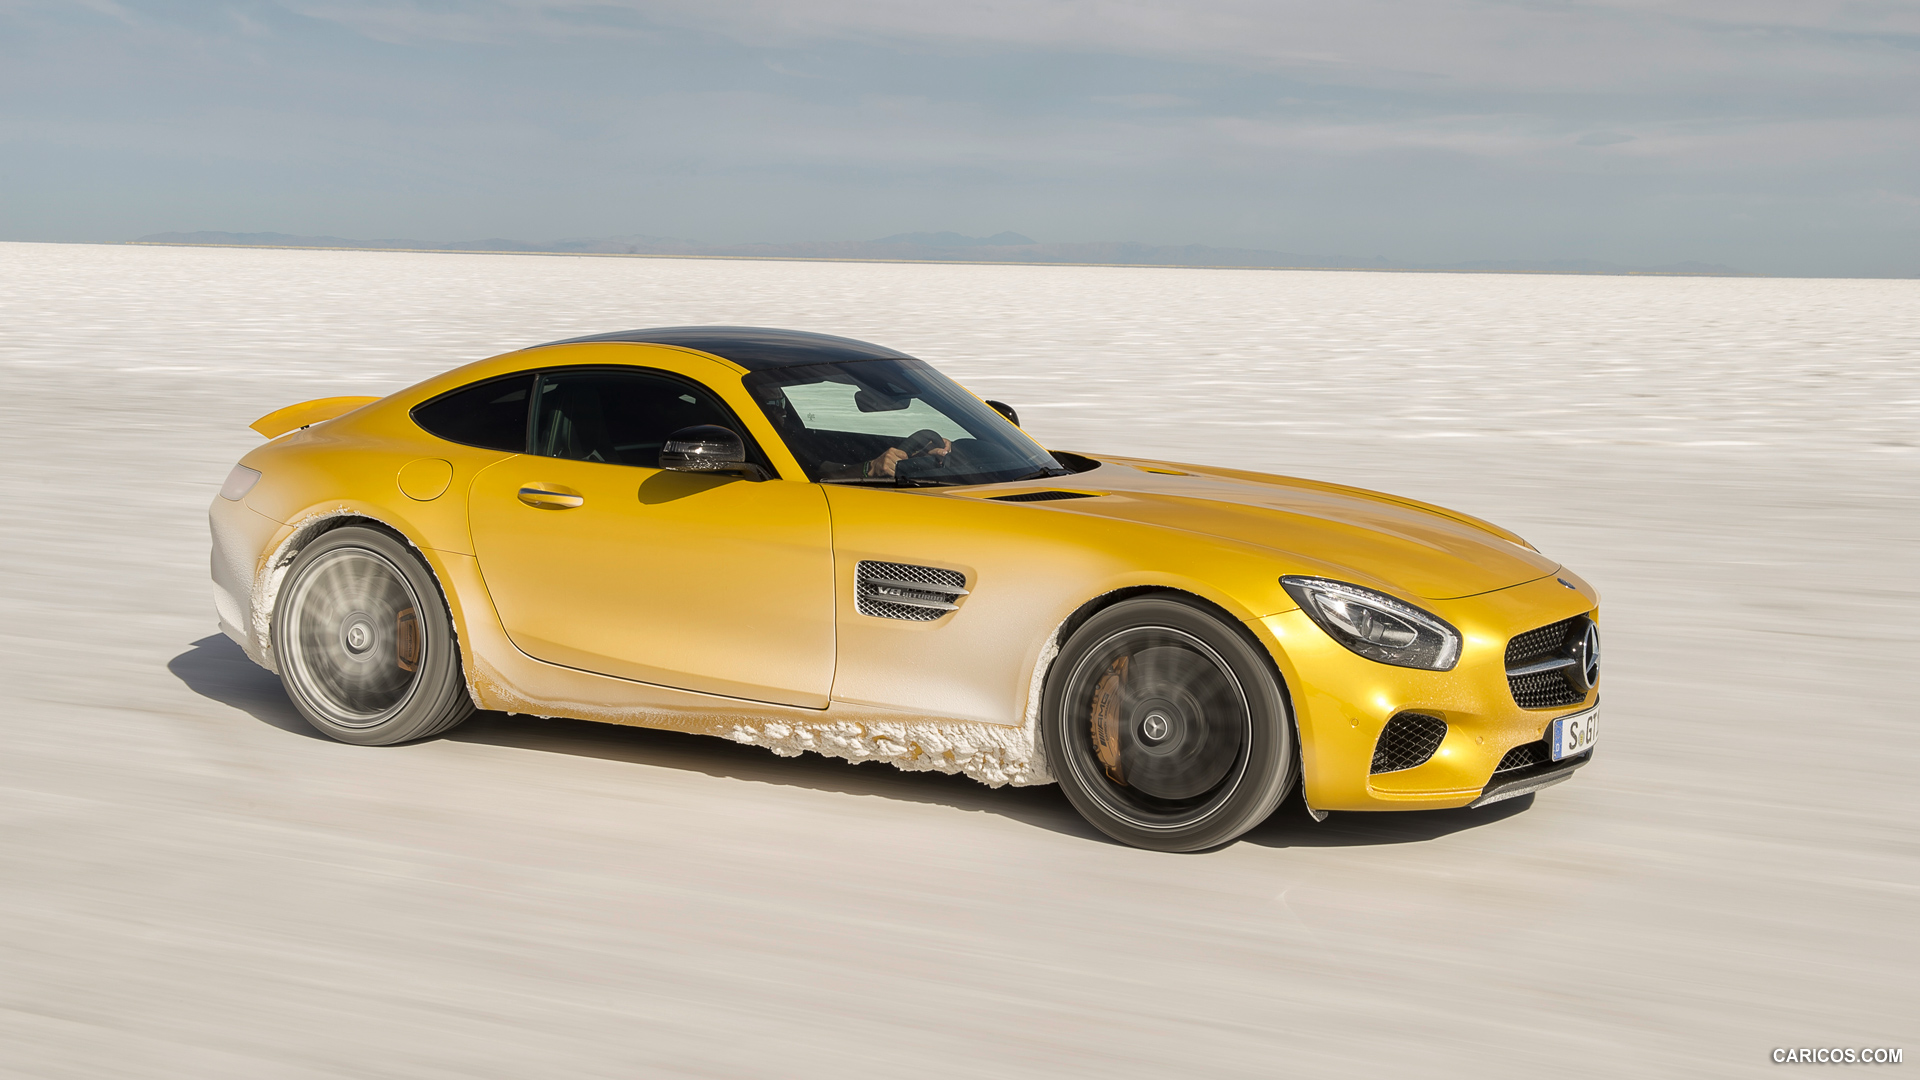 2016 Mercedes-AMG GT (Solarbeam) - Side, #79 of 190